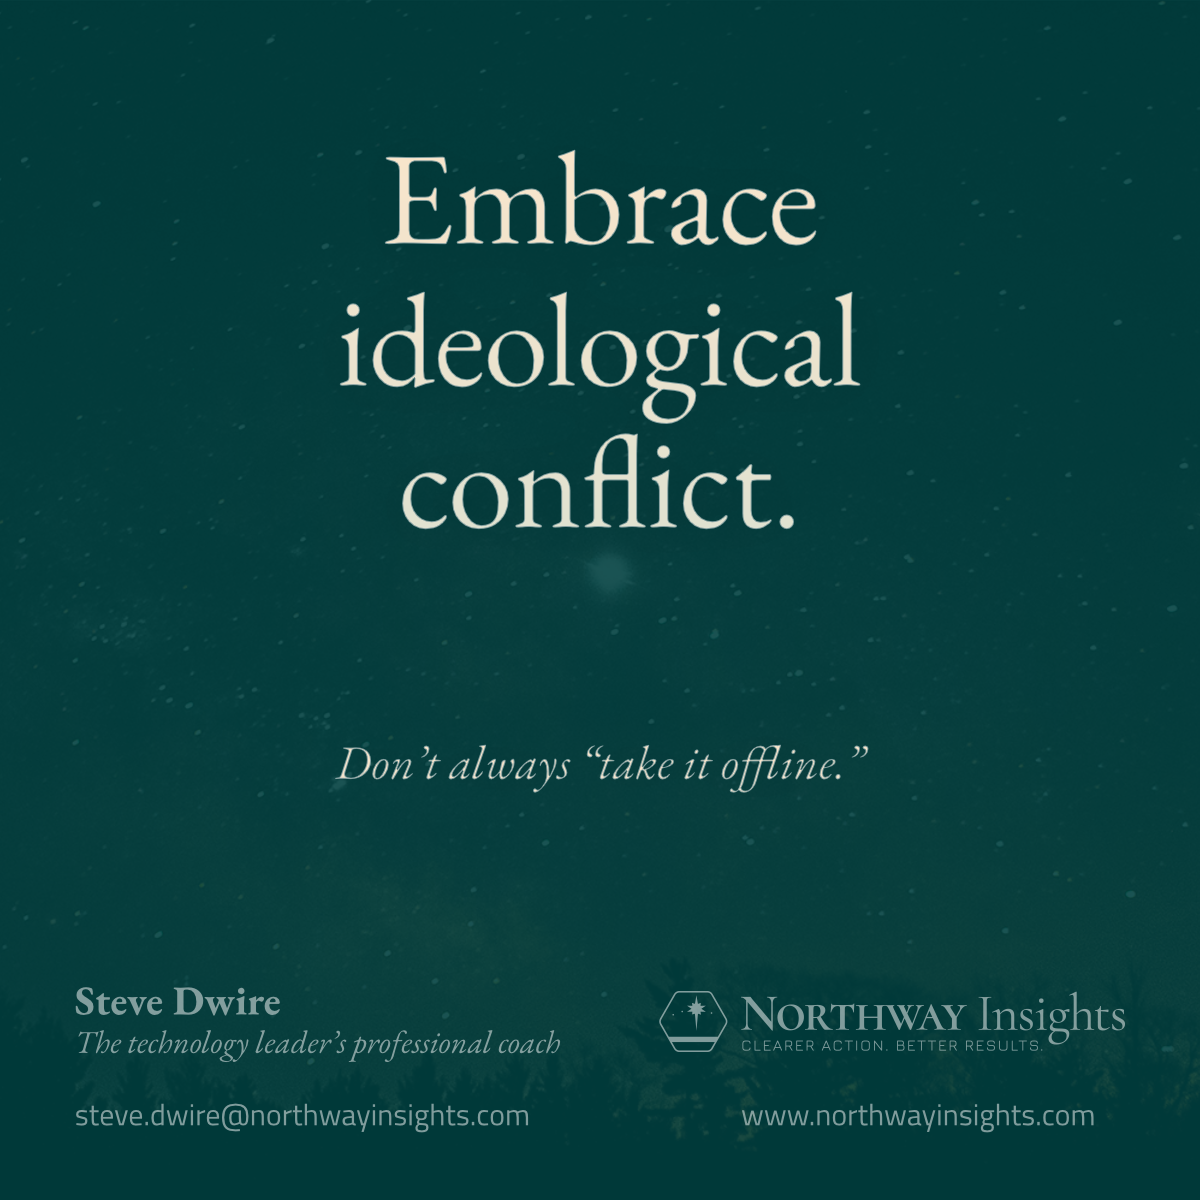 Embrace ideological conflict. (Don't always "take it offline.")